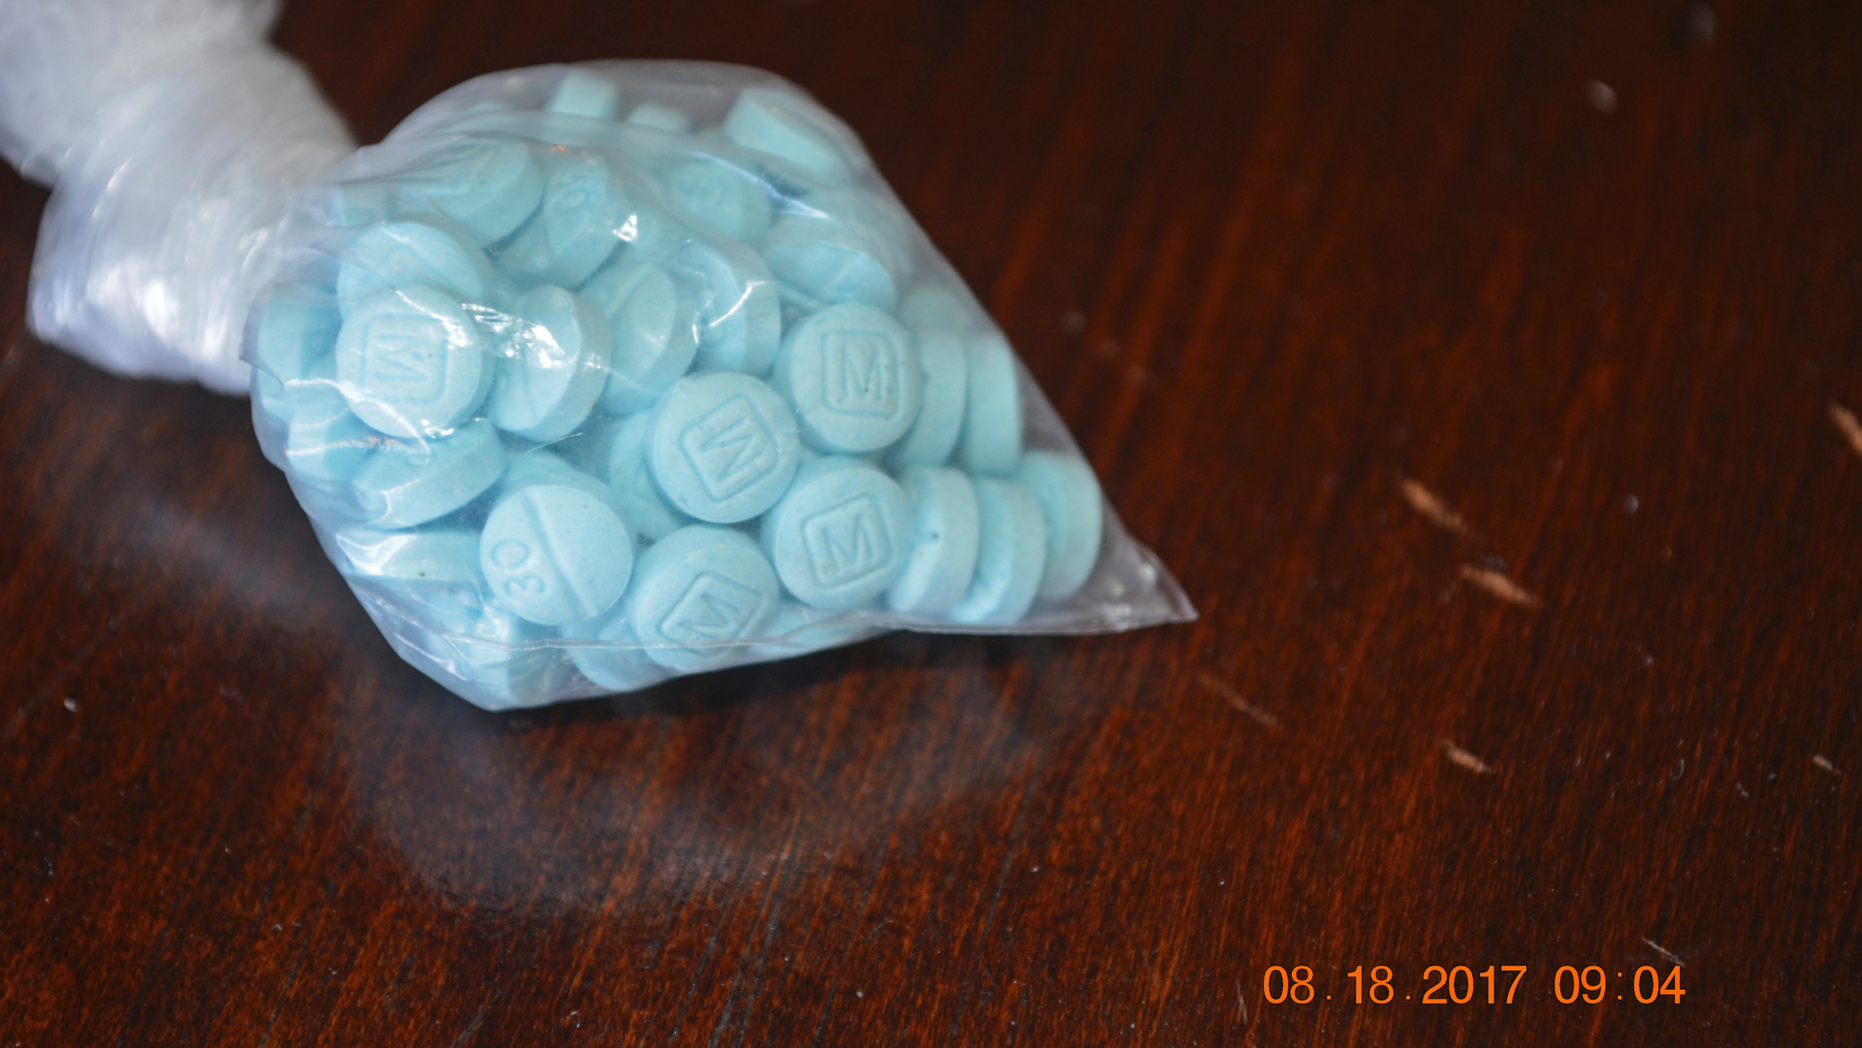 FILE - This undated file photo provided by the U.S. Drug Enforcement Administration's Phoenix Division shows a closeup of fentanyl-laced sky blue pills. Police in small city on the U.S.-Mexico border say three students have been arrested for possessing fentanyl pills on campus, including one who had over 3,000 pills with her. San Luis, Arizona, police say two 18-year-old girls and a 16-year-old boy were arrested Wednesday, June 5, 2019 after an on-campus officer found them with pills. (Drug Enforcement Administration via AP, File)